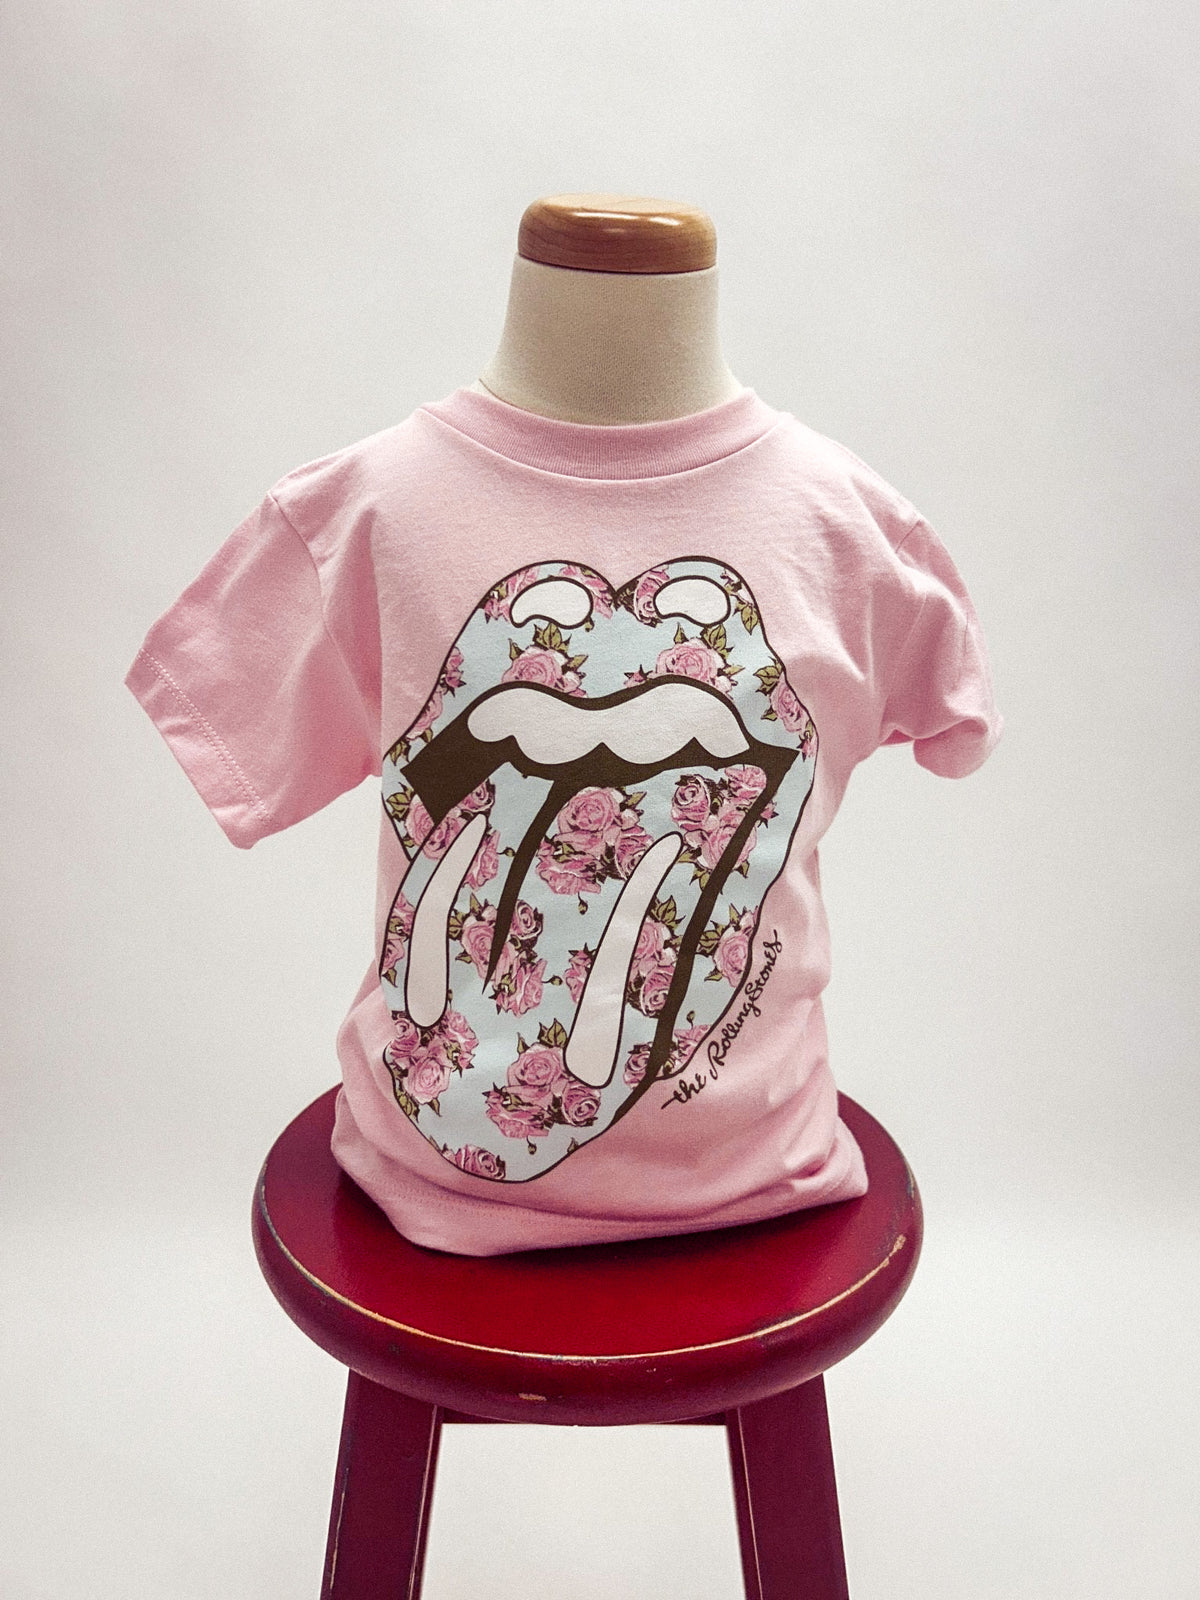 Kids Rolling Stones floral lick t-shirt pink - Trendy Band T-Shirts and Sweatshirts at Lush Fashion Lounge Boutique in Oklahoma City